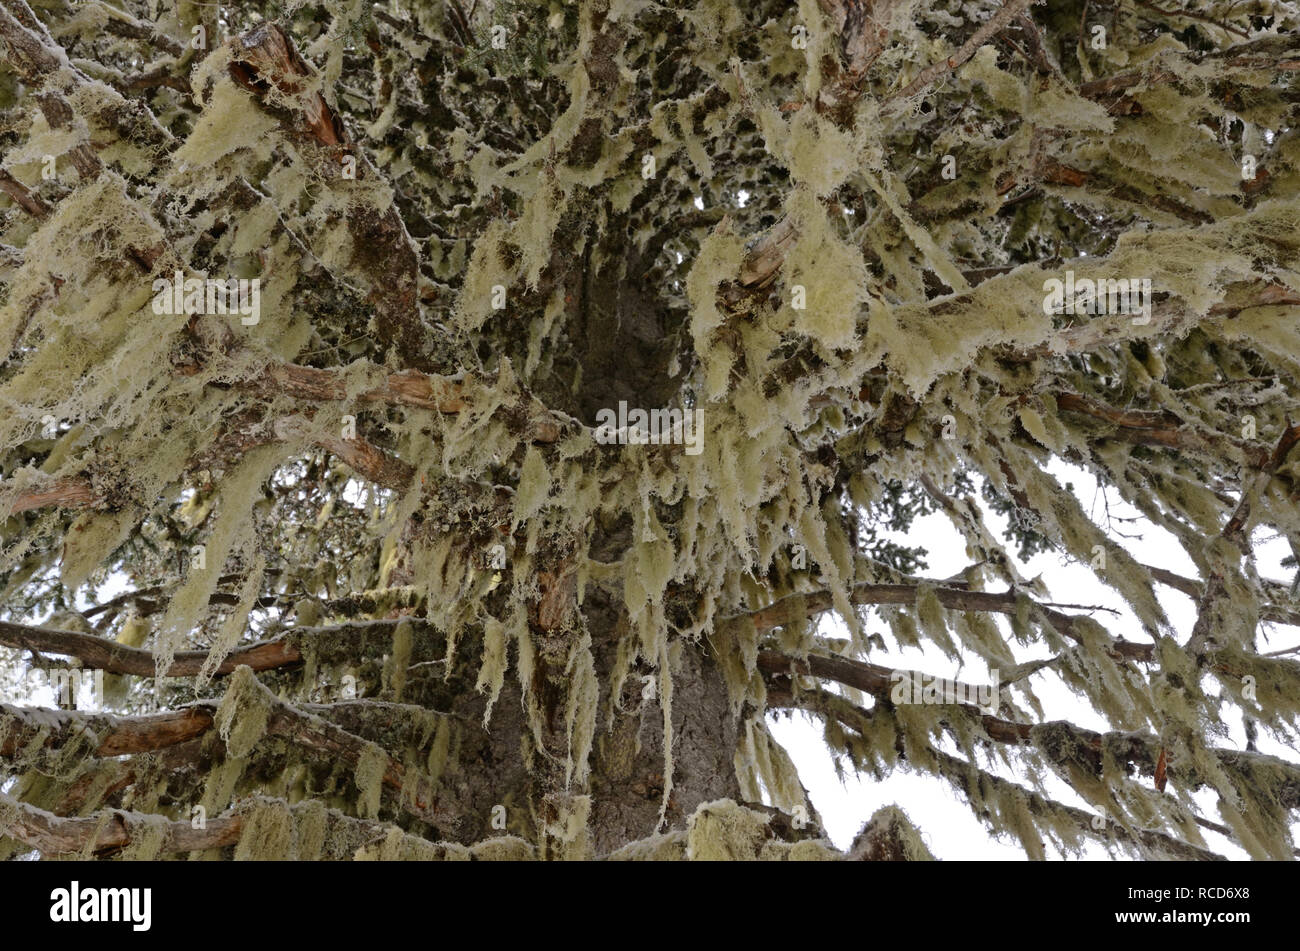 Witches' hair lichen in a spruce fir forest after a snowstorm in fall. Purcell Mountains, North Idaho. (Photo by Randy Beacham) Stock Photo